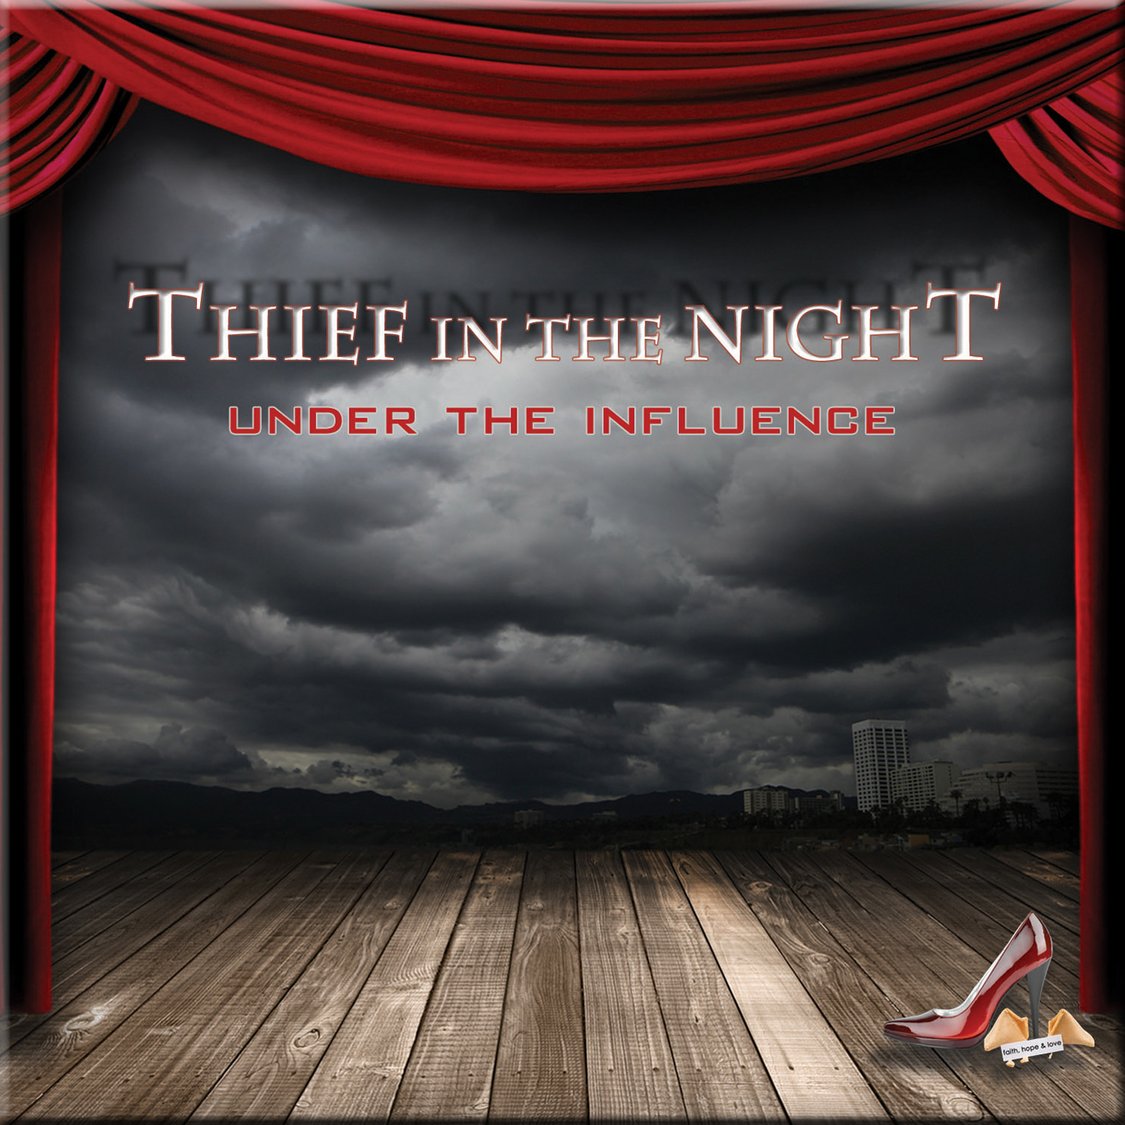 a thief in the night